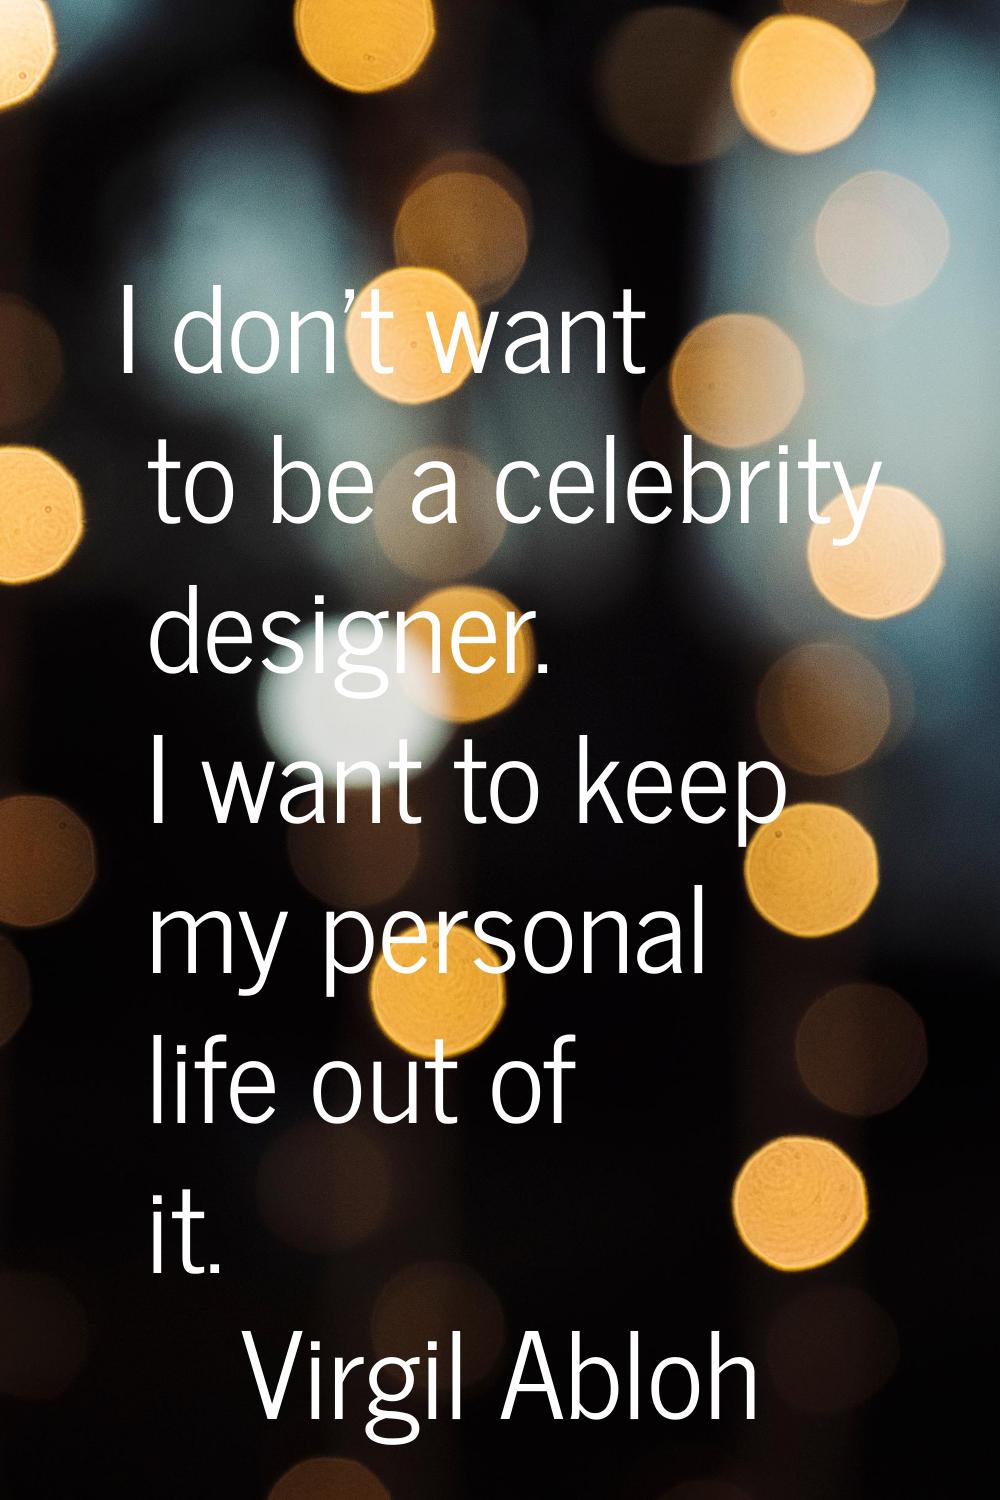 I don't want to be a celebrity designer. I want to keep my personal life out of it.